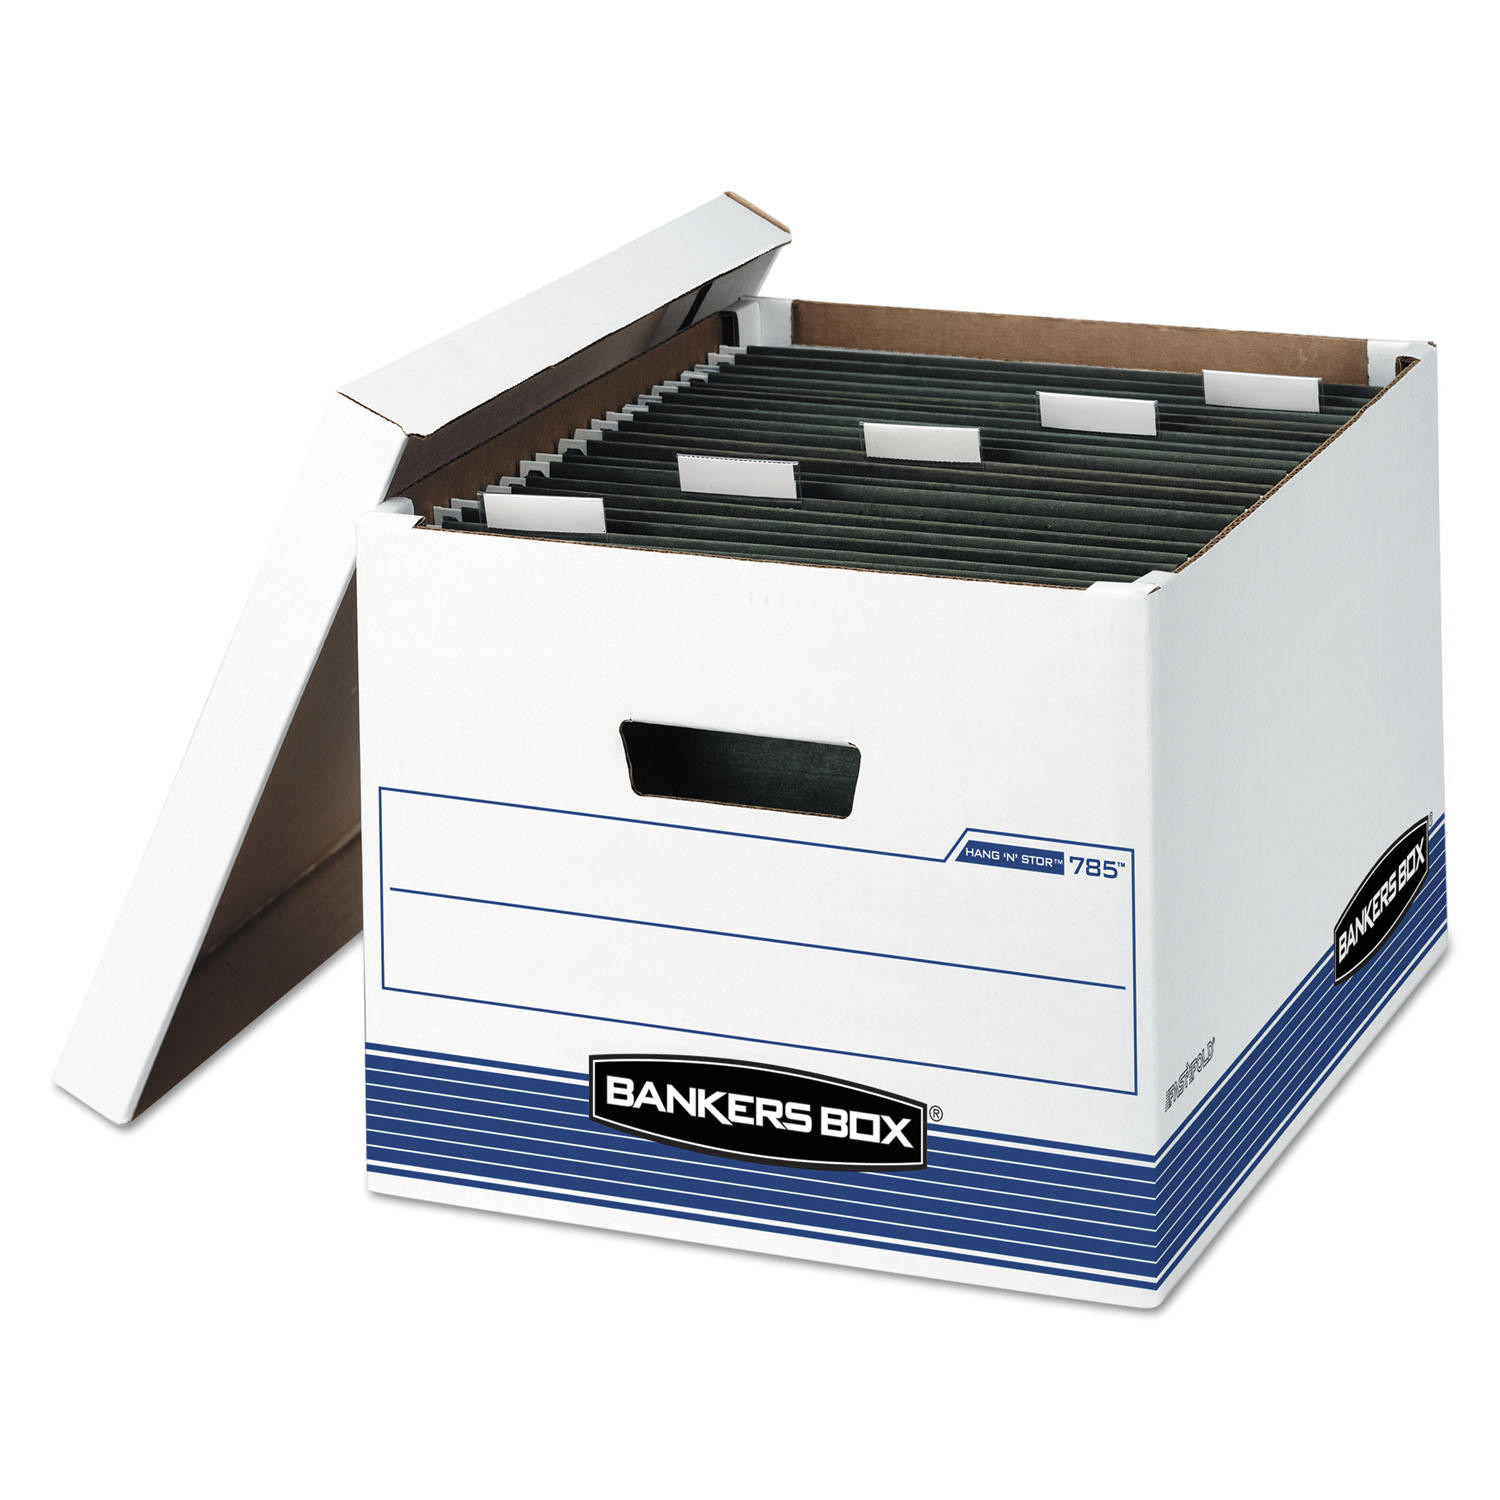 Bankers Box HANG'N'STOR Storage Box with Lift-off Lid, White/Blue (Legal/Letter, 4ct.)